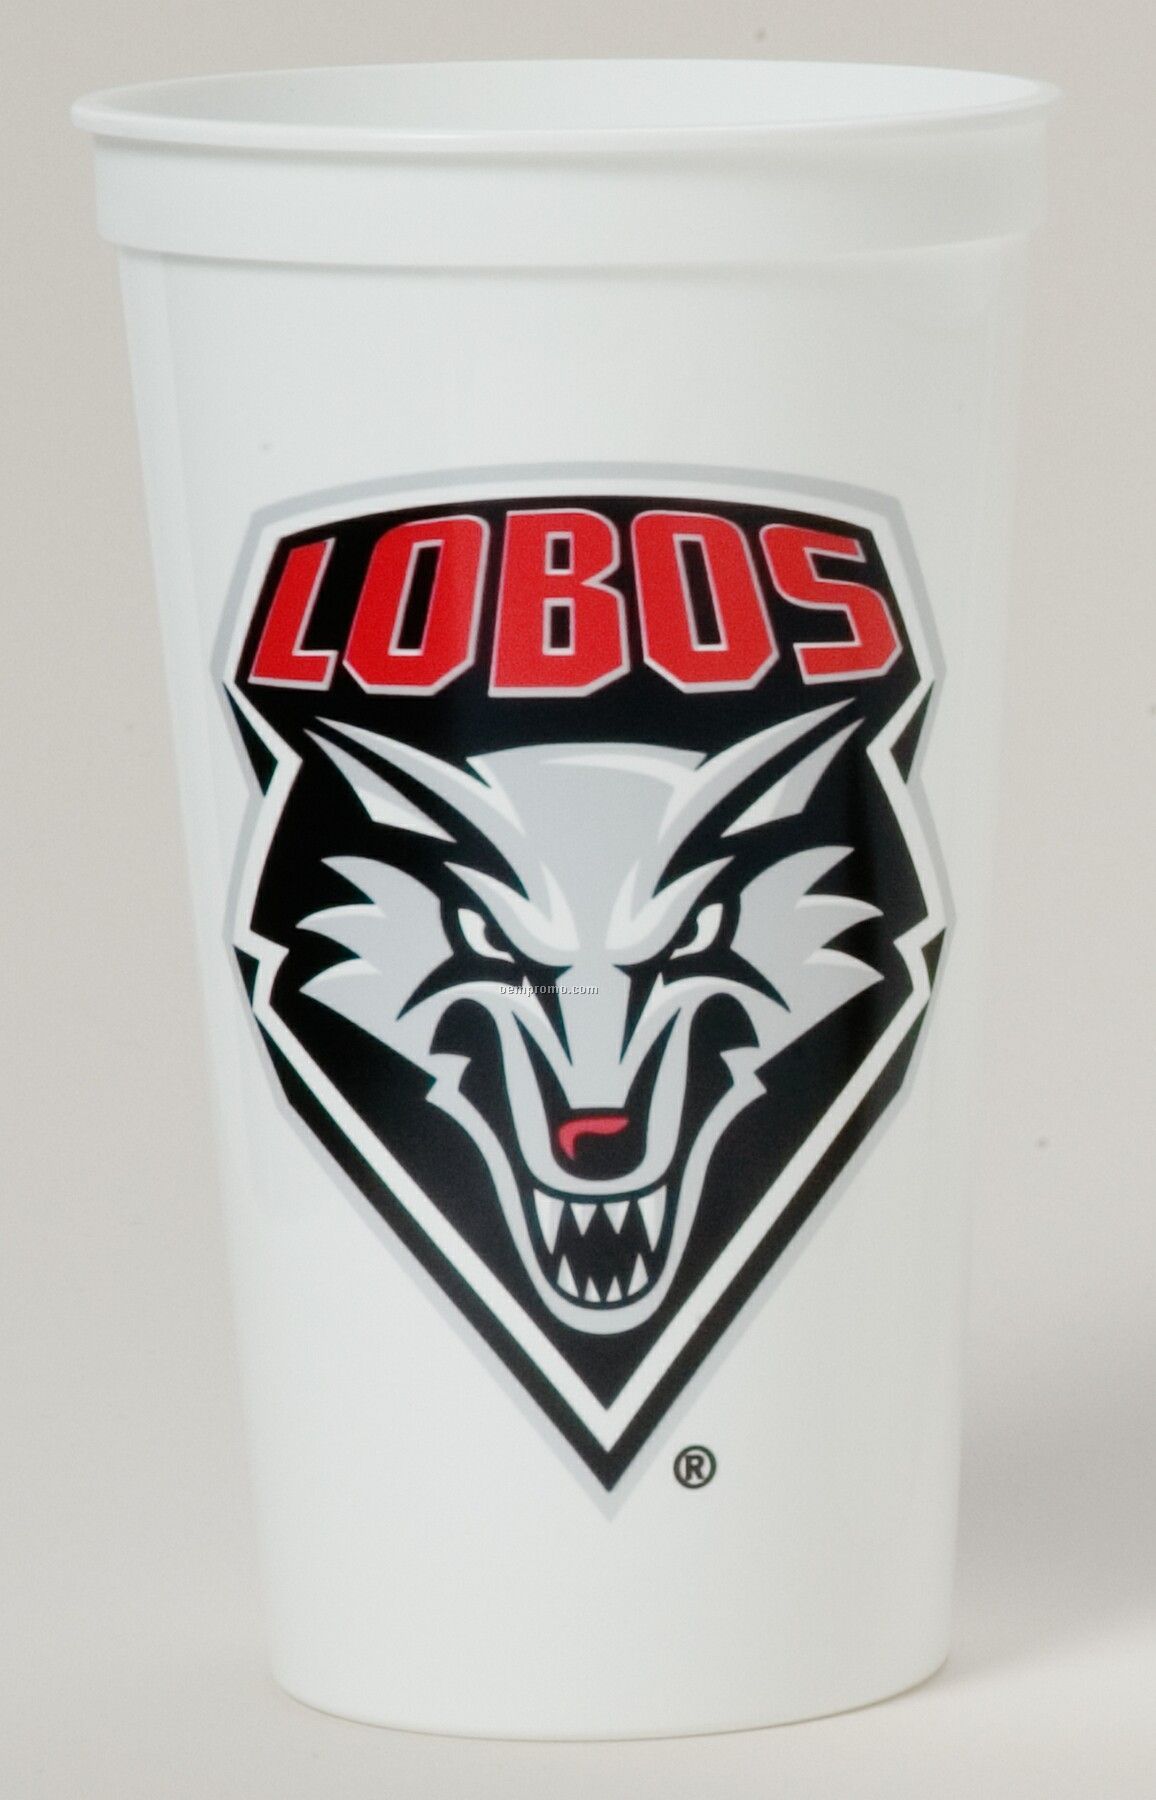 32 Oz. Smooth White Stadium Cup (5 Color Offset Imprint)